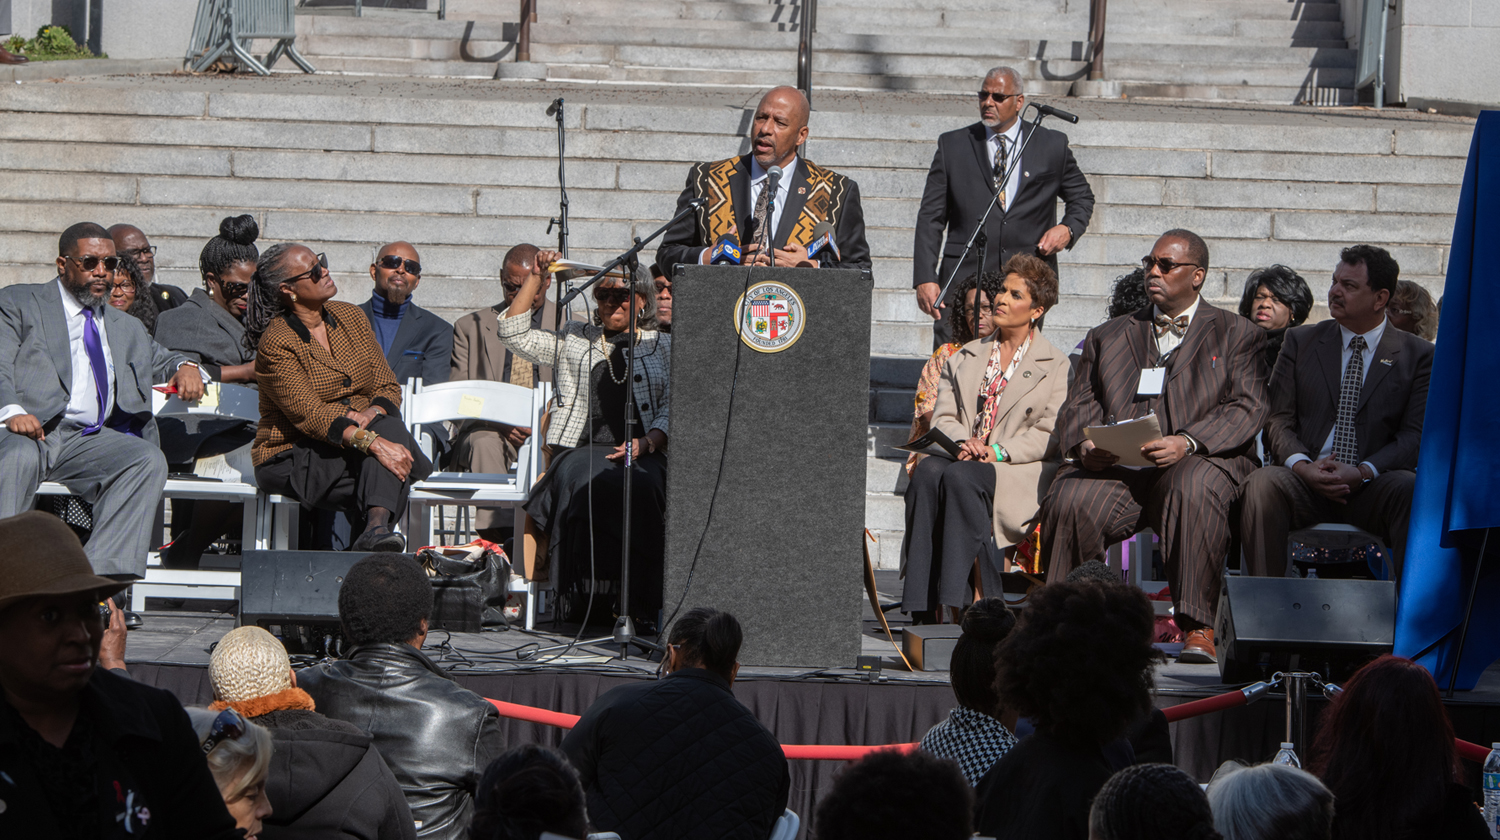 President Parham speaks during the City of Los Angeles's African American History Month reception.